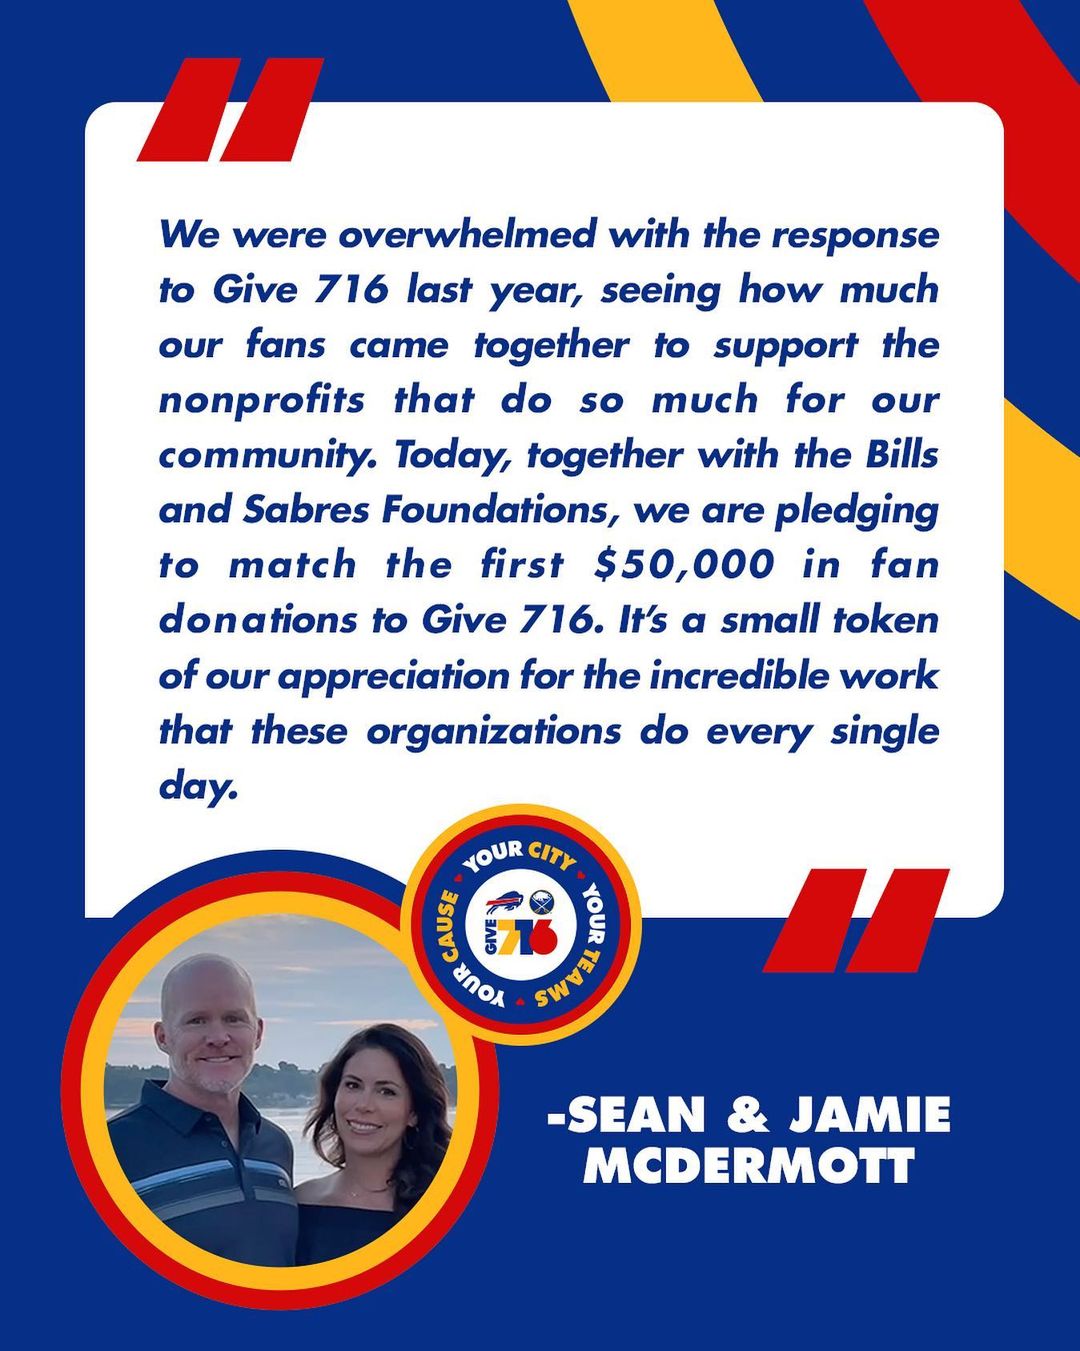 Helping those who help make a difference in our community. Thank you Sean and Ja...